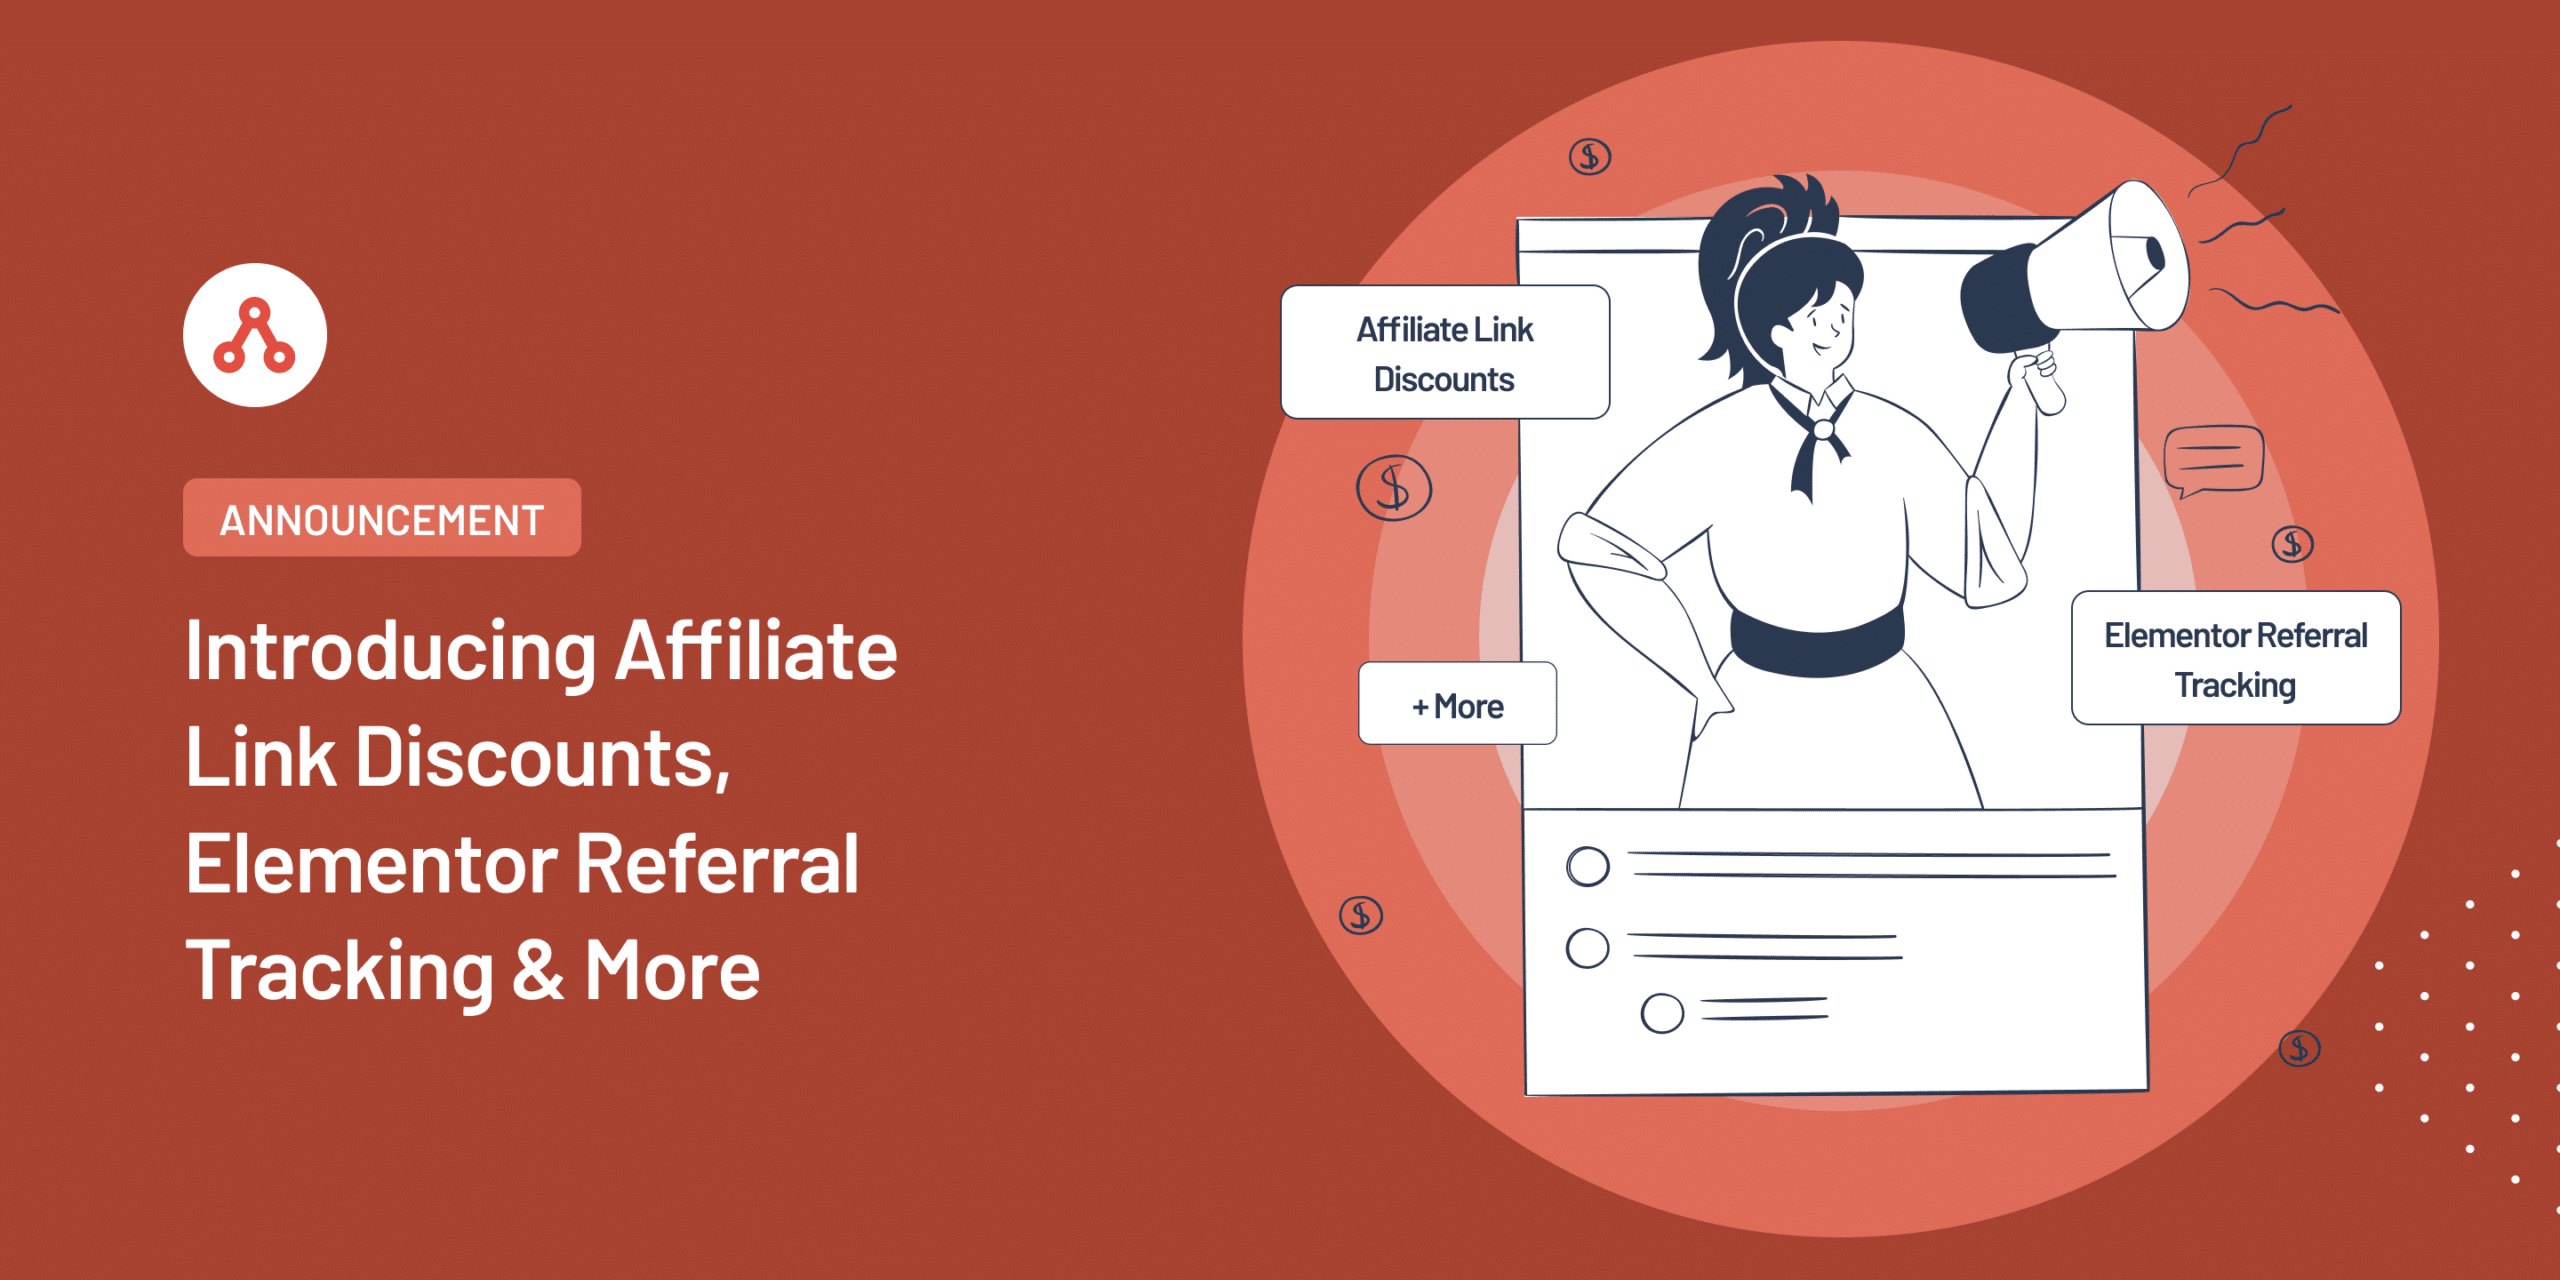 Introducing Affiliate Link Discounts, Elementor Referral Tracking & More